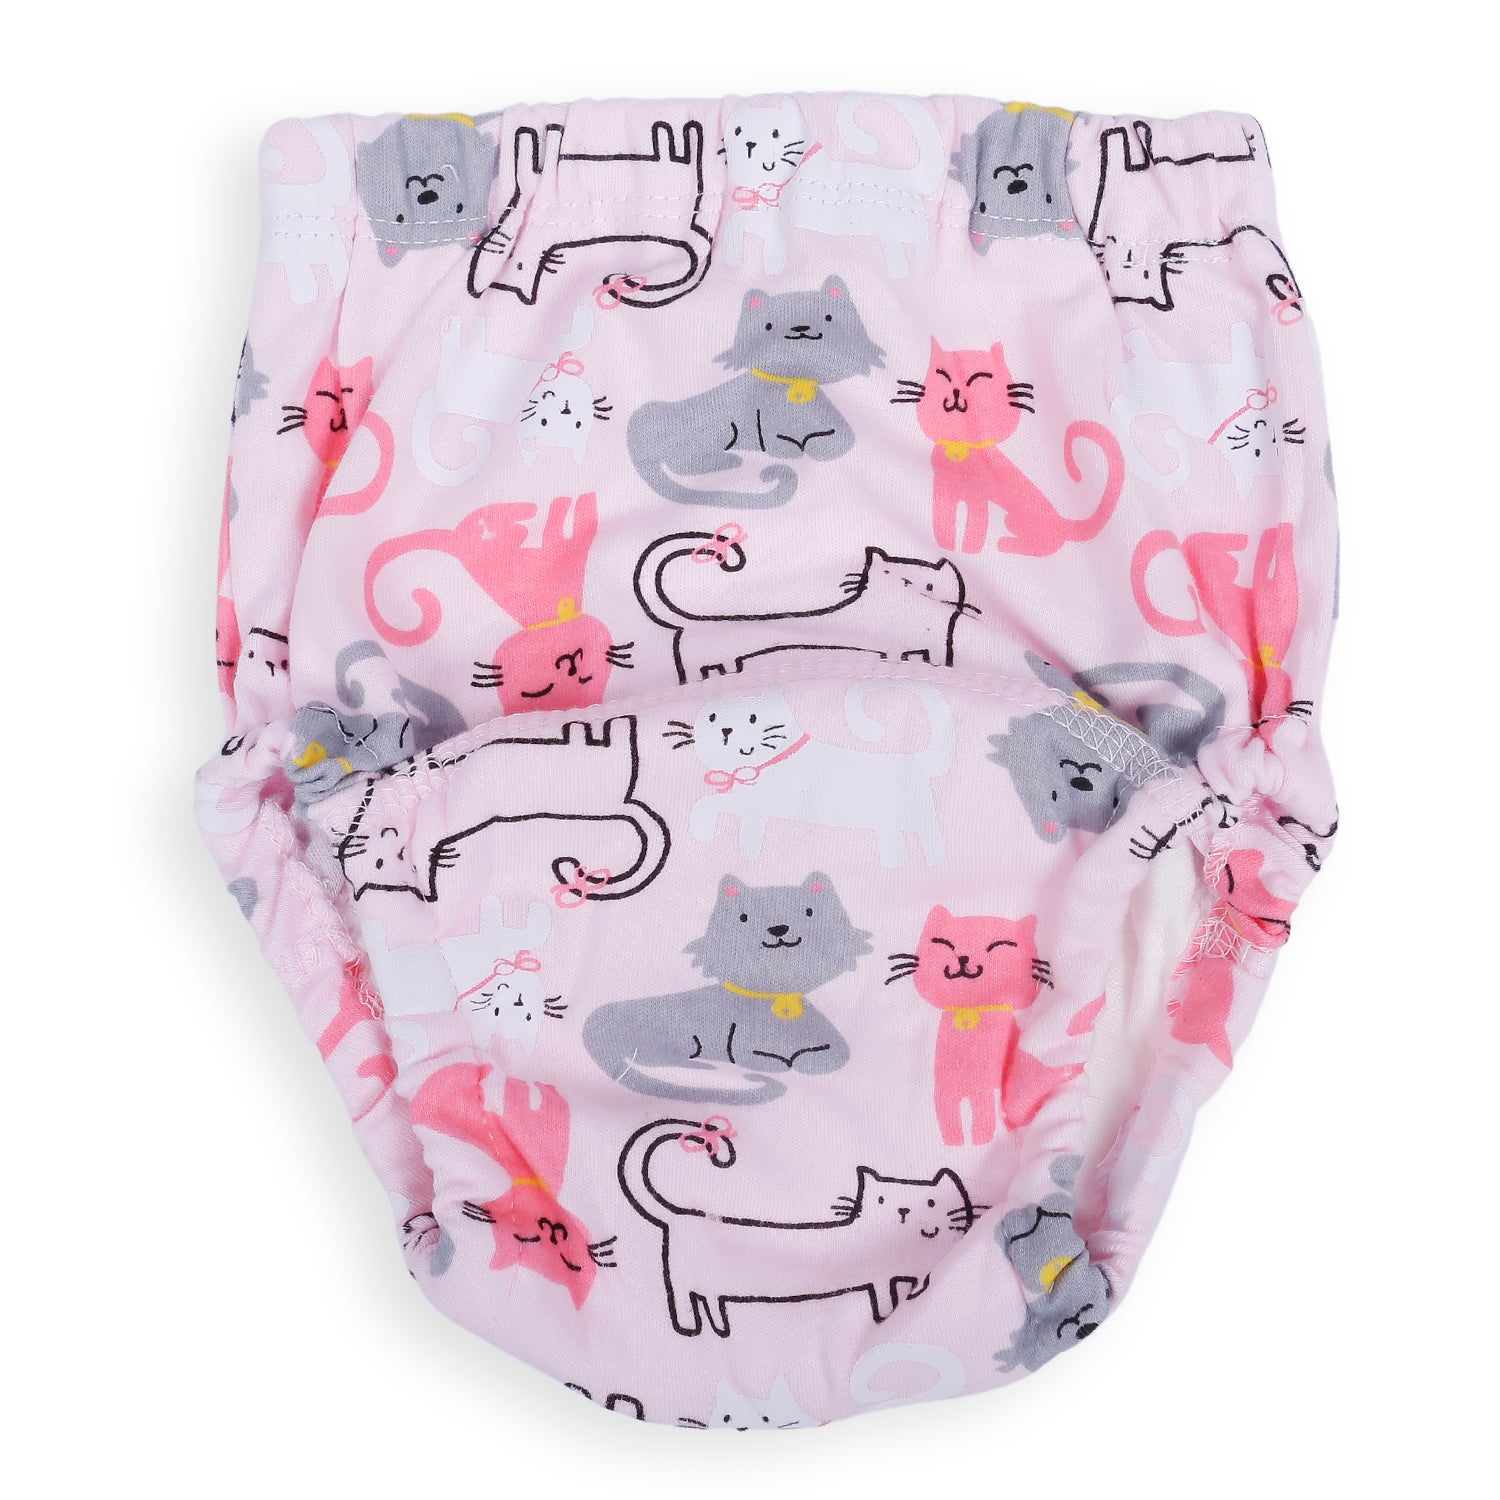 Kitty Party Reusable Cloth Training Pants Clothing Accessory Diaper Panty - Multicolour